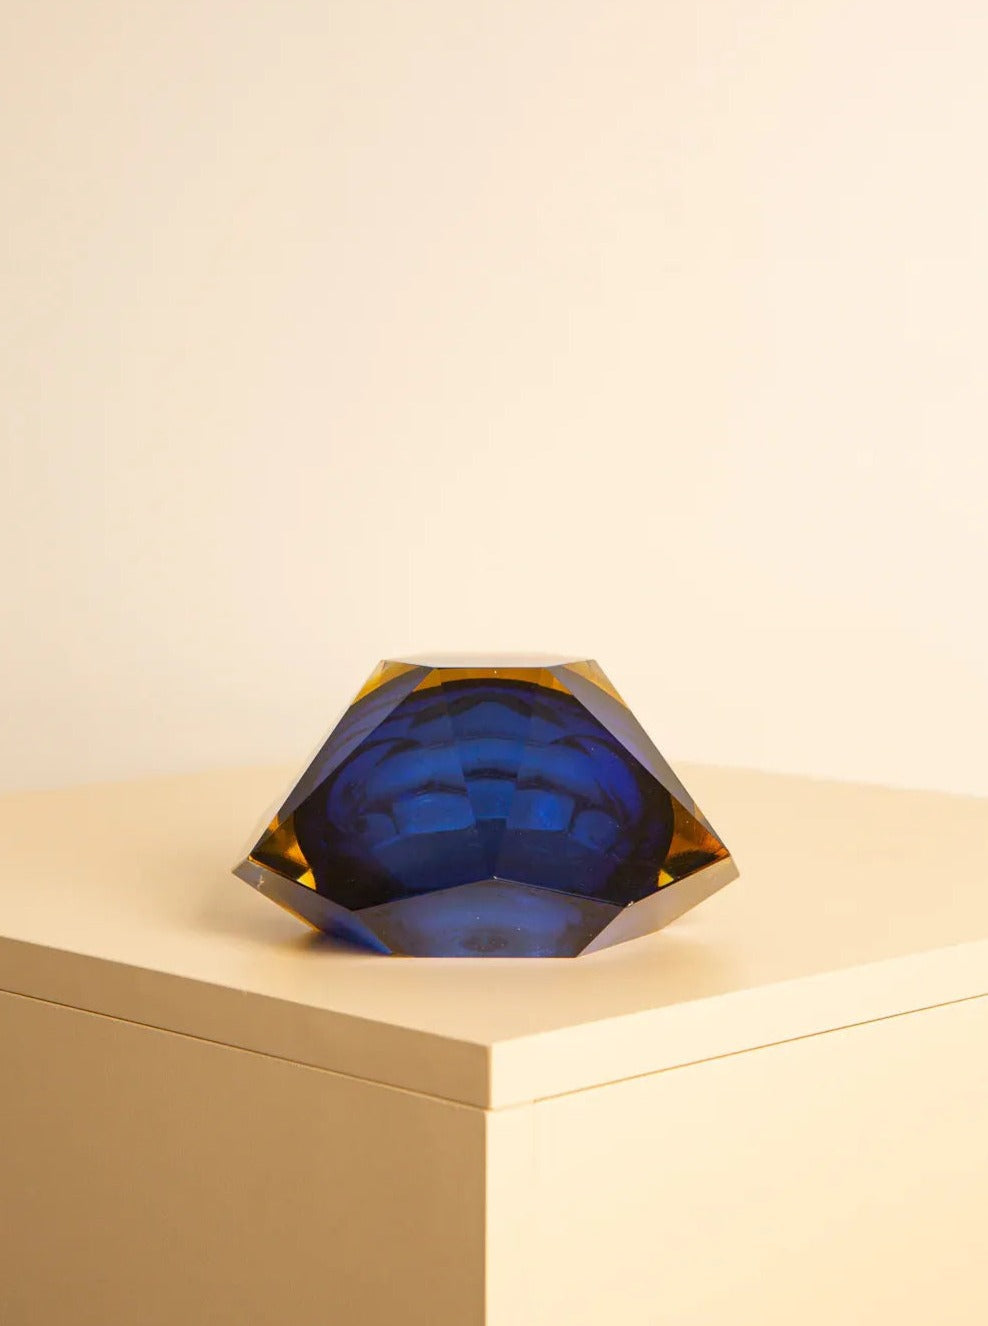 A Large vide-poches blue "Diamond" by Flavio Poli 60's from Treaptyque, handcrafted from fine Italian Murano glass, sits atop a beige pedestal. The sculpture has a faceted design and appears to be multi-dimensional, reflecting light in different shades. The background is a plain, neutral-colored wall.